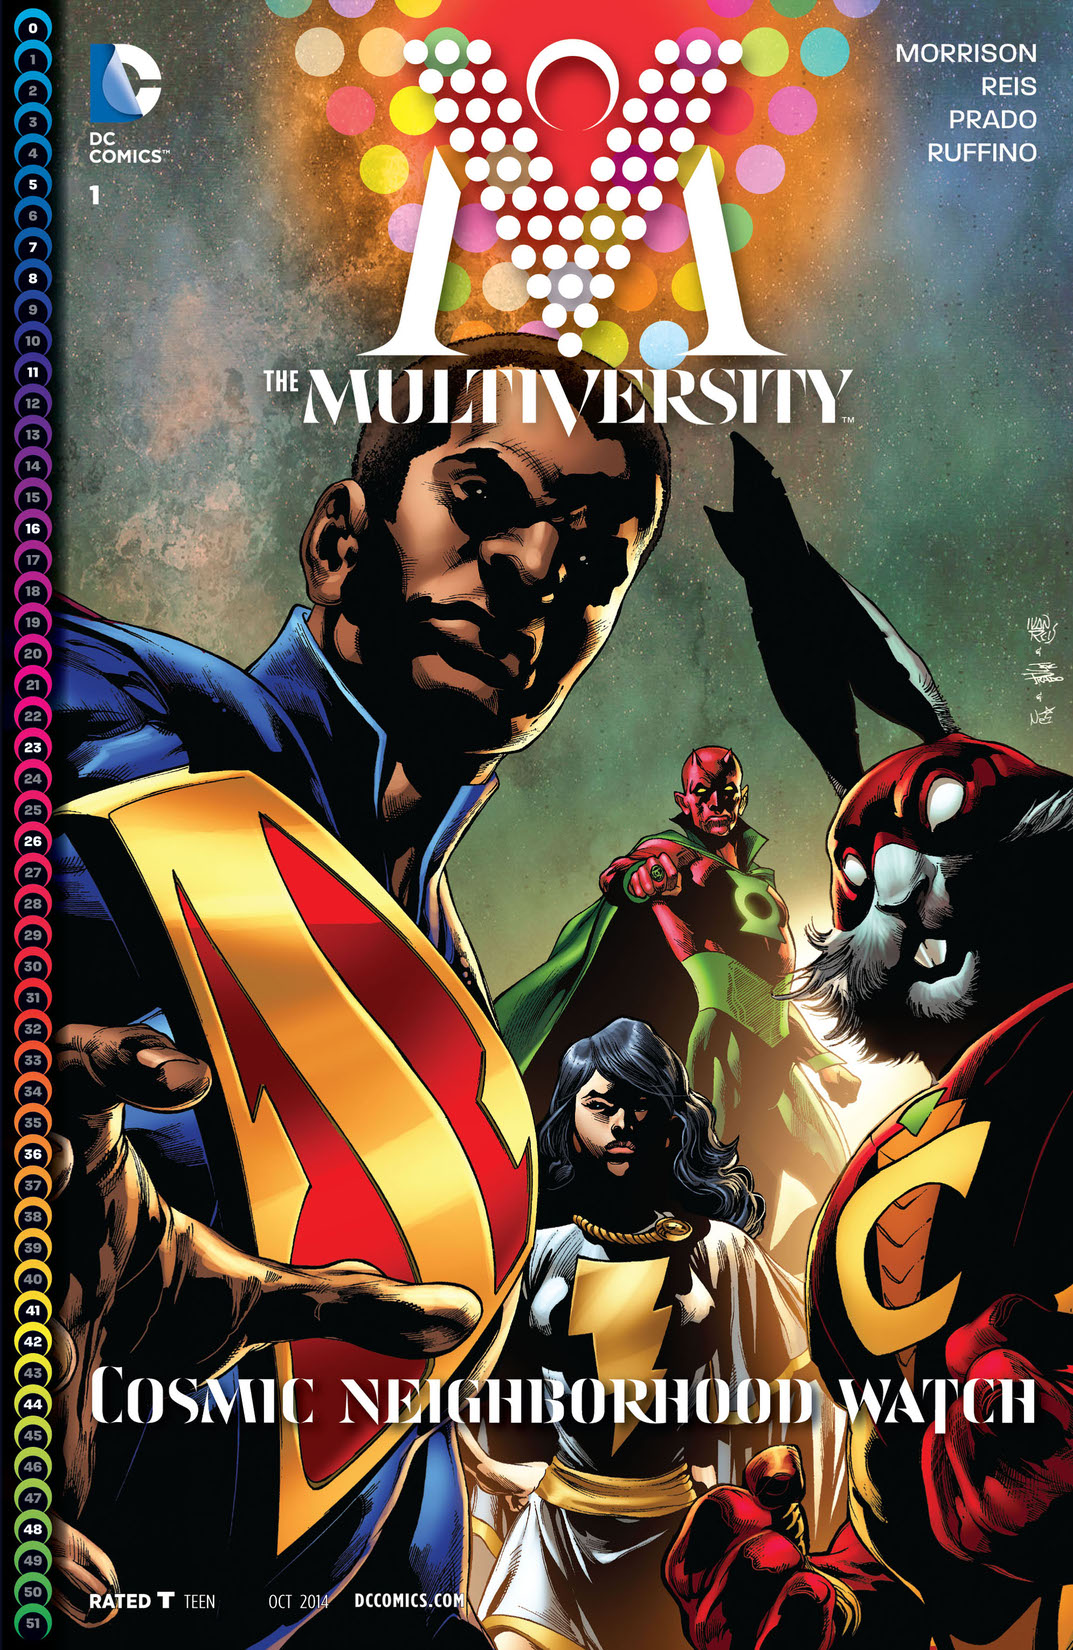 The Multiversity #1 preview images